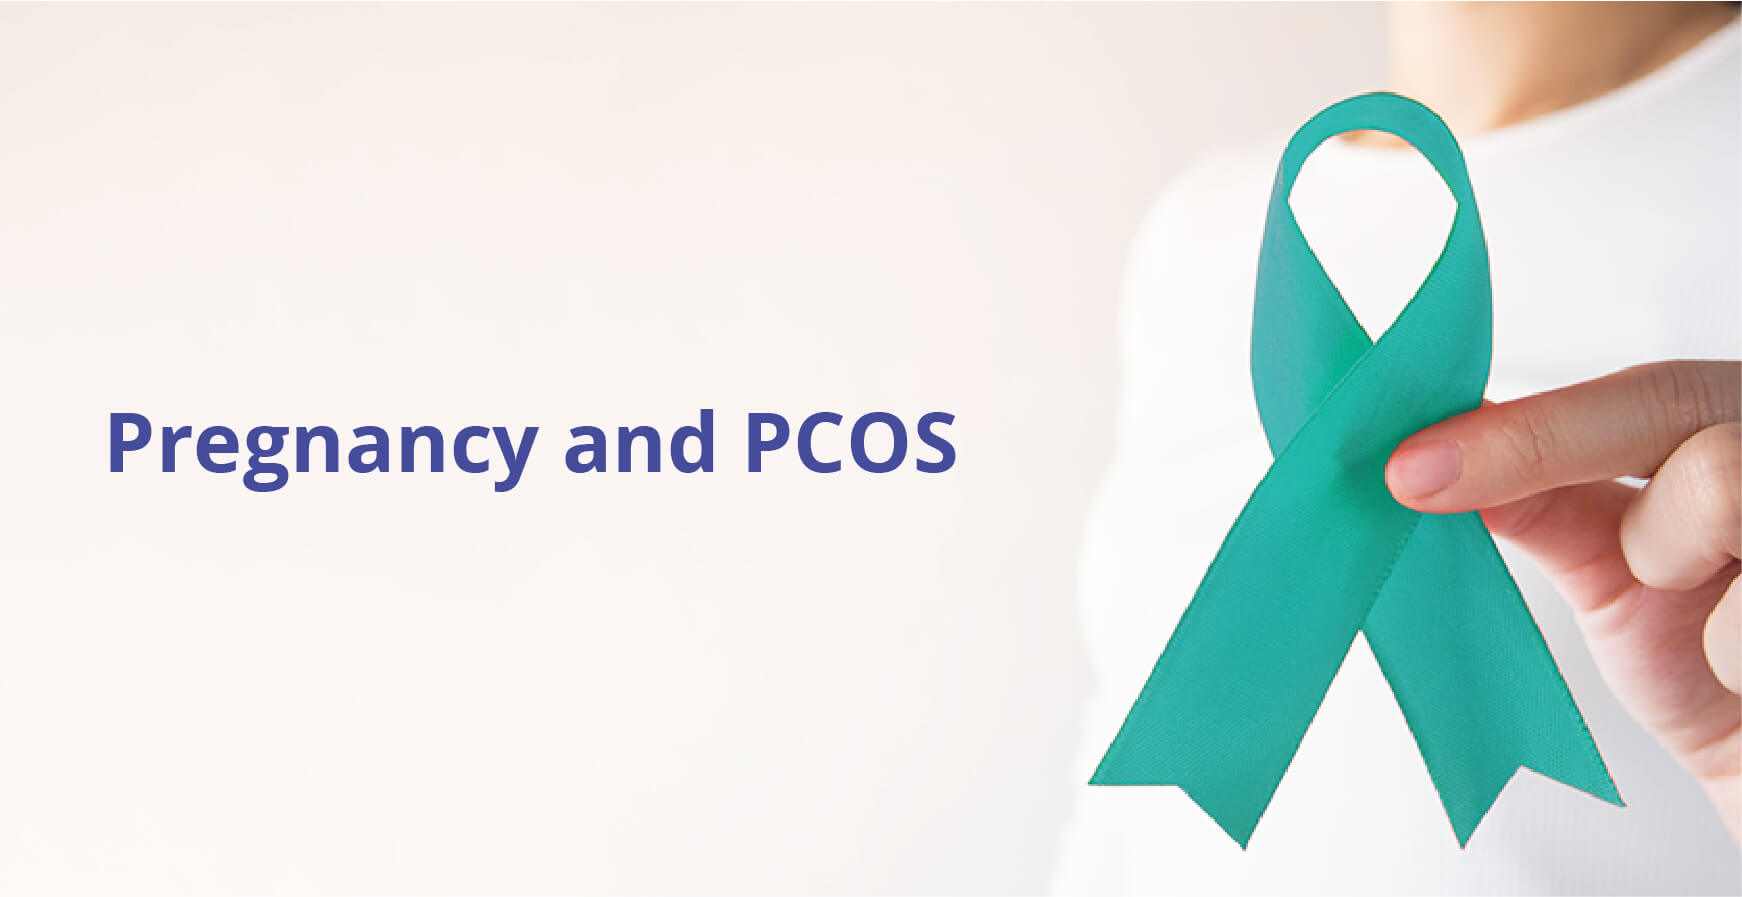 PCOS and Pregnancy: What to Expect